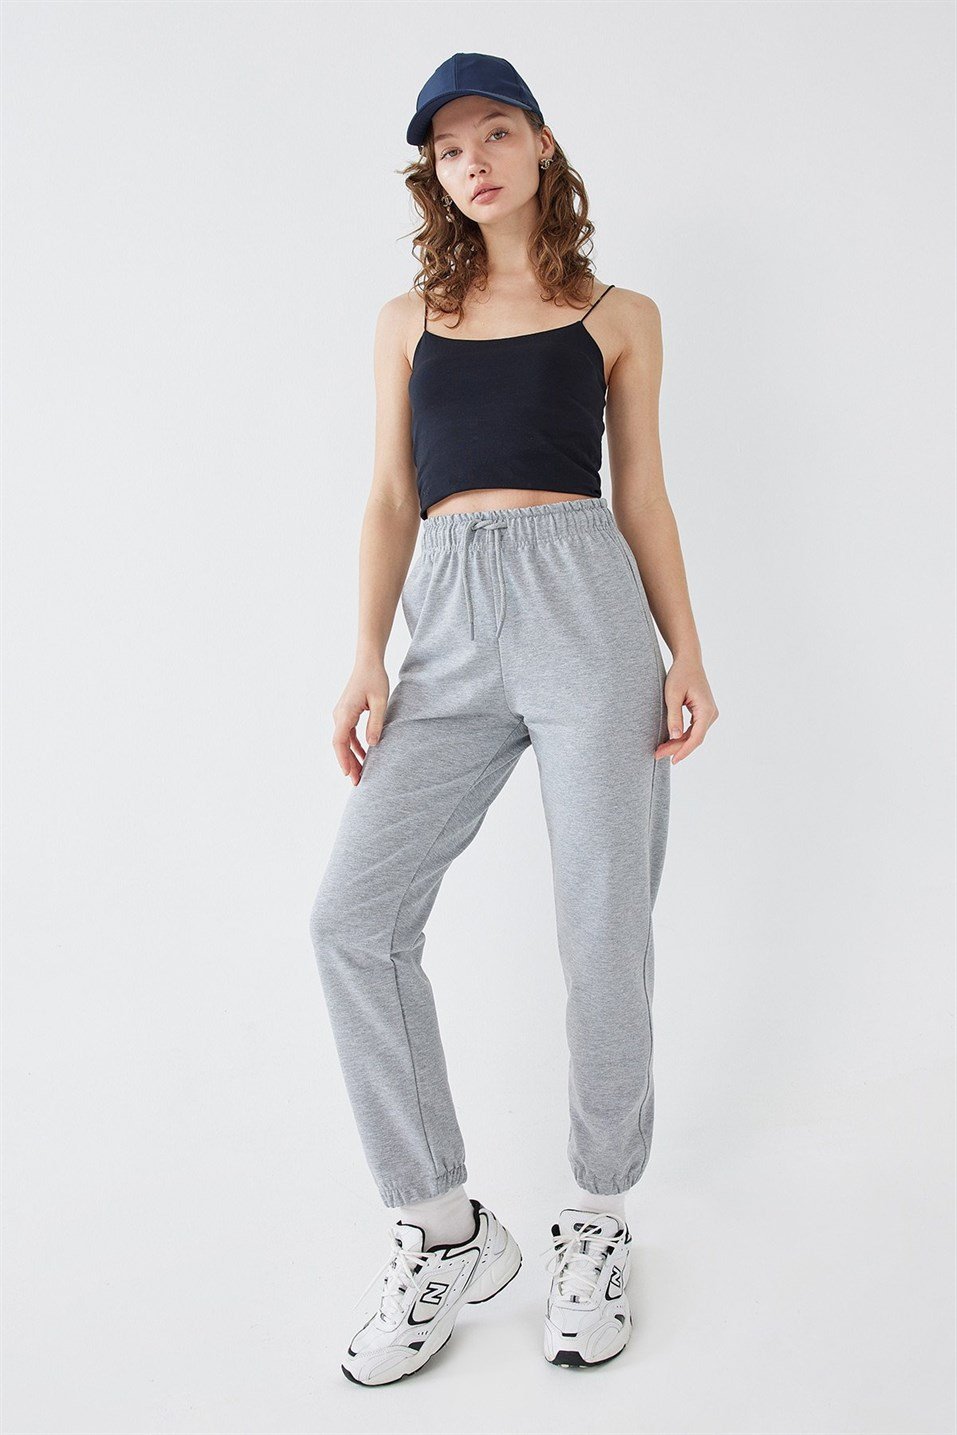 Grey Cotton Jogger Trousers